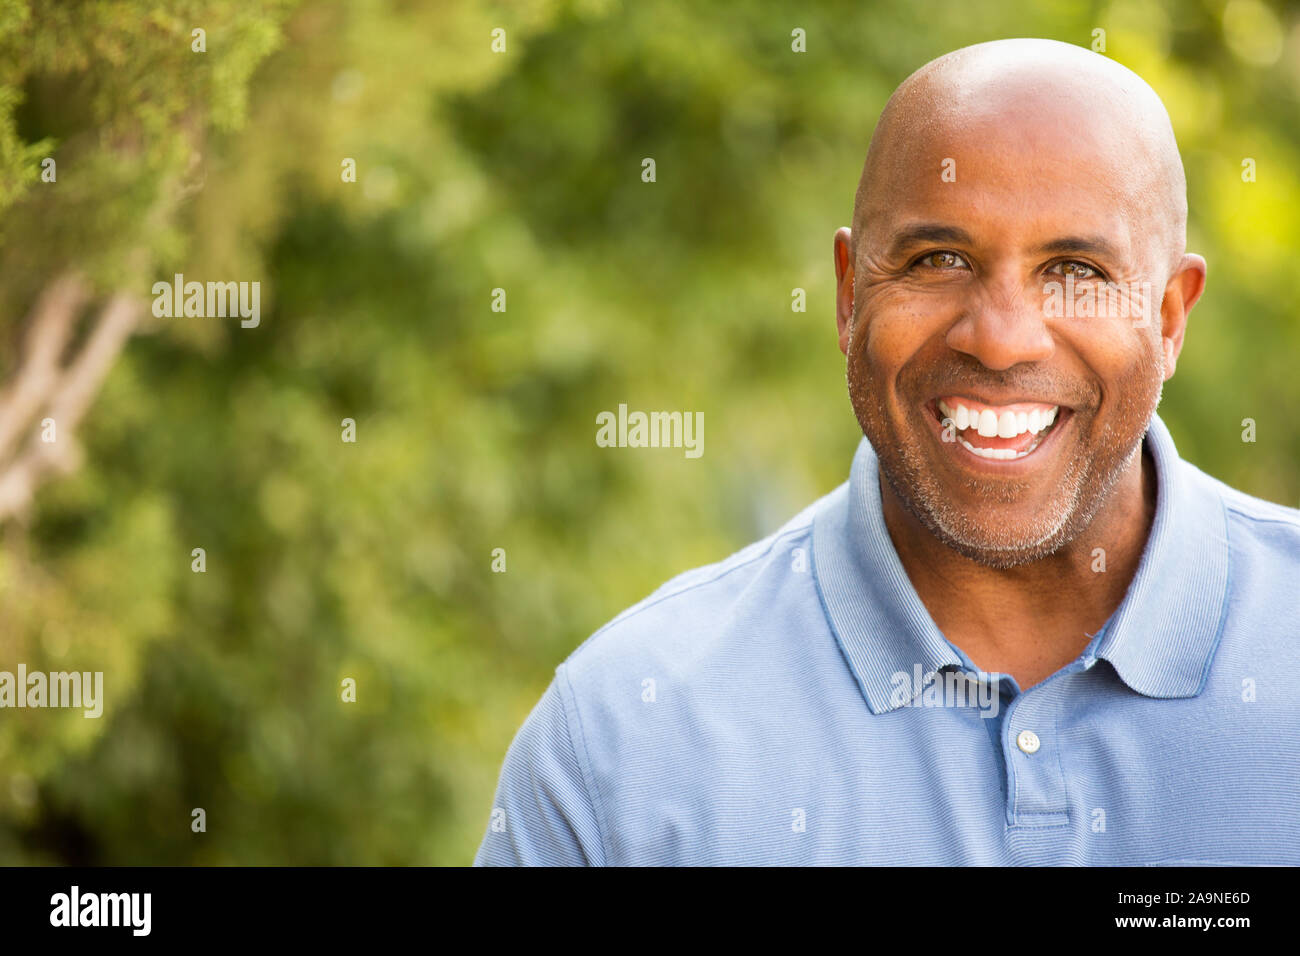 Portrait of a young African American man smiling. Banque D'Images